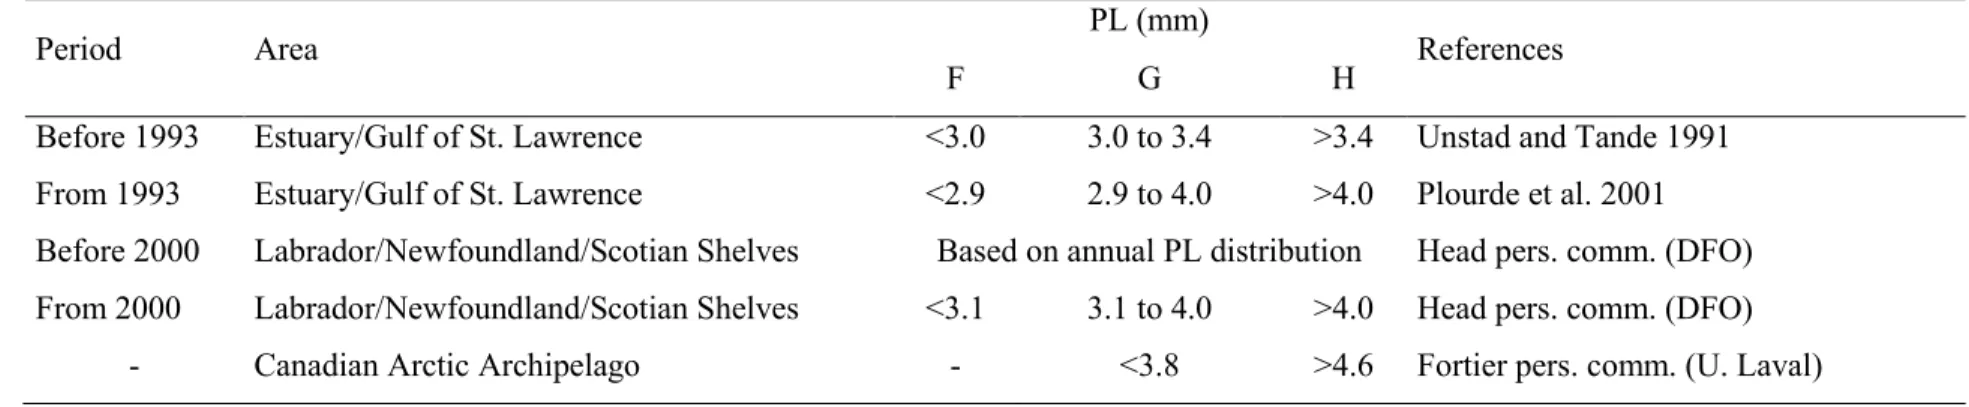 Table  2.1  Prosome  length  (PL)  of  stage  V  copepodite  commonly  used  to  discriminate  three  Calanus  species  along  the  Canadian  Arctic  and  Atlantic Coasts